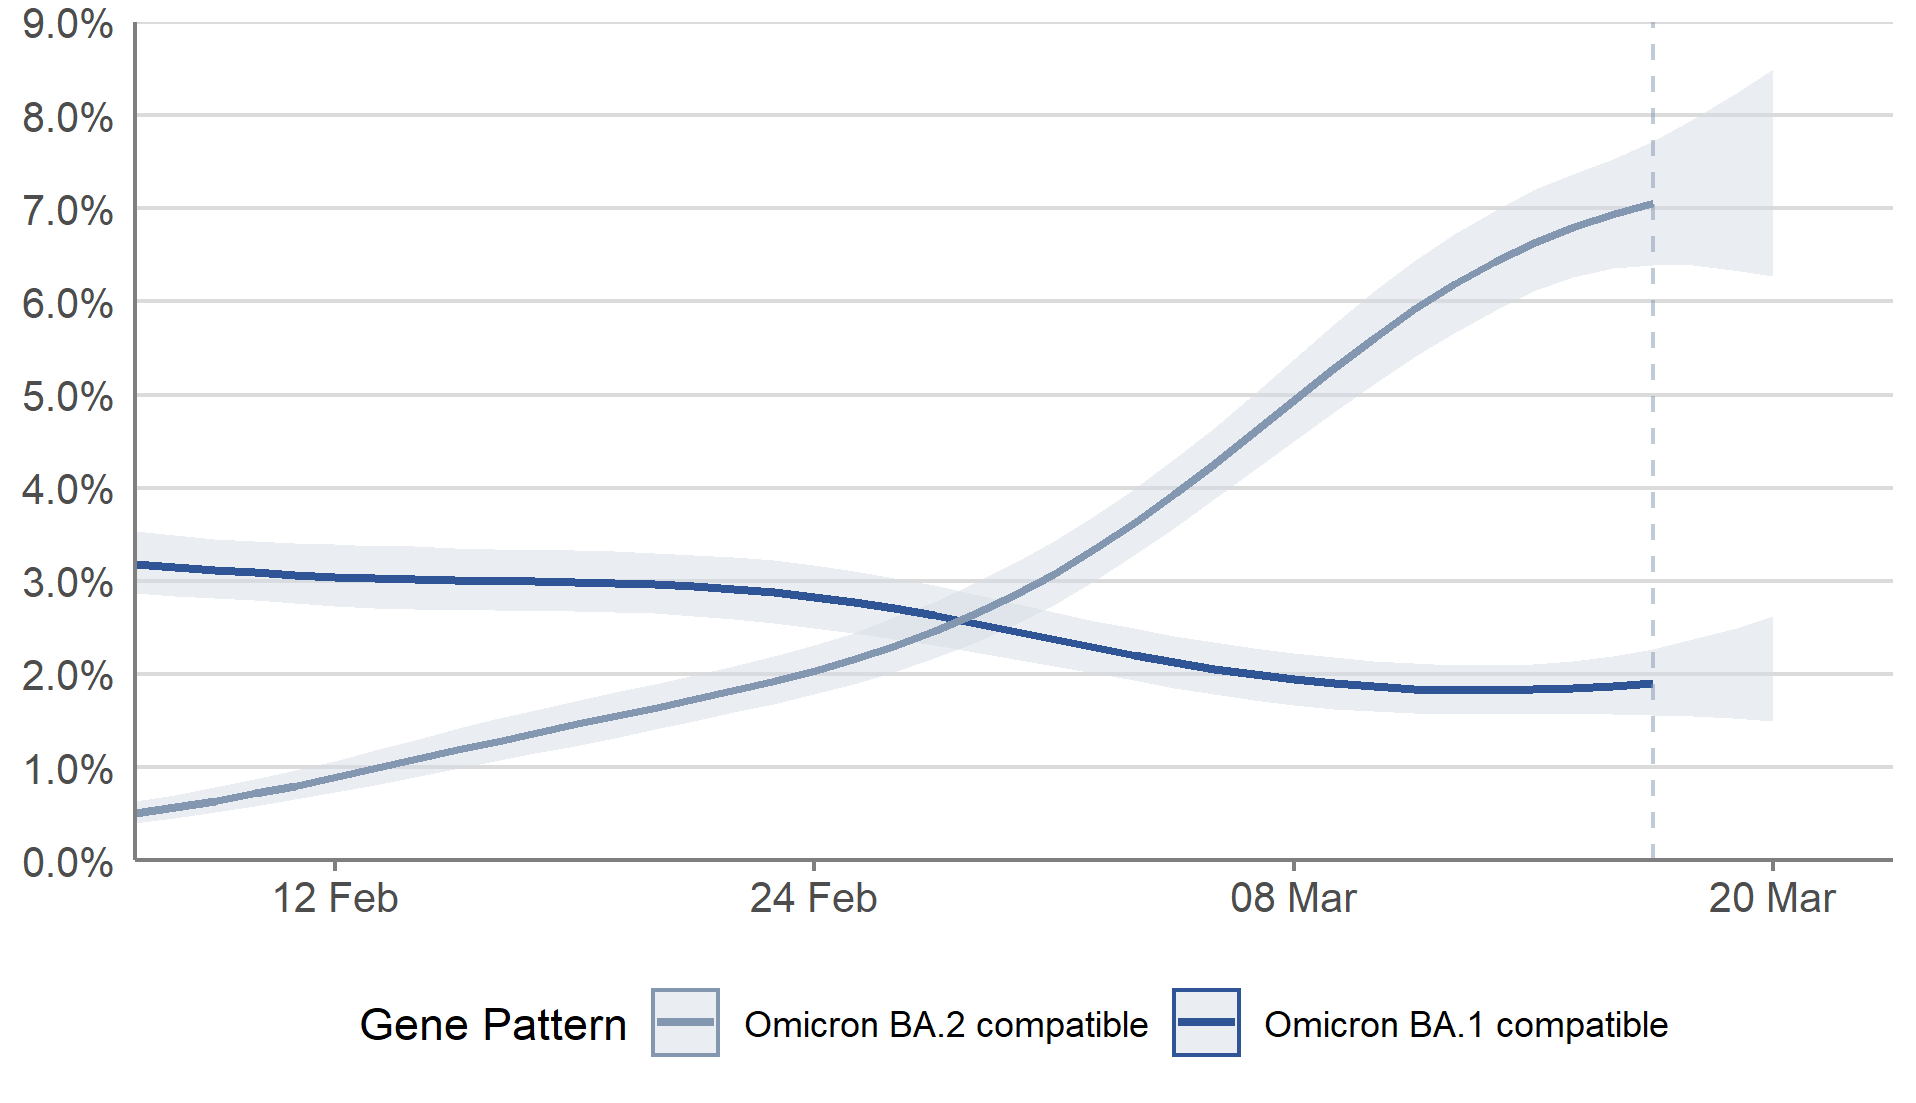 In Scotland, the percentage of people with infections compatible with the Omicron BA.2 variant continued to increase in the most recent week. The percentage of people with infections compatible with the Omicron BA.1 decreased in the most recent two weeks, but the trend is uncertain in the most recent week.